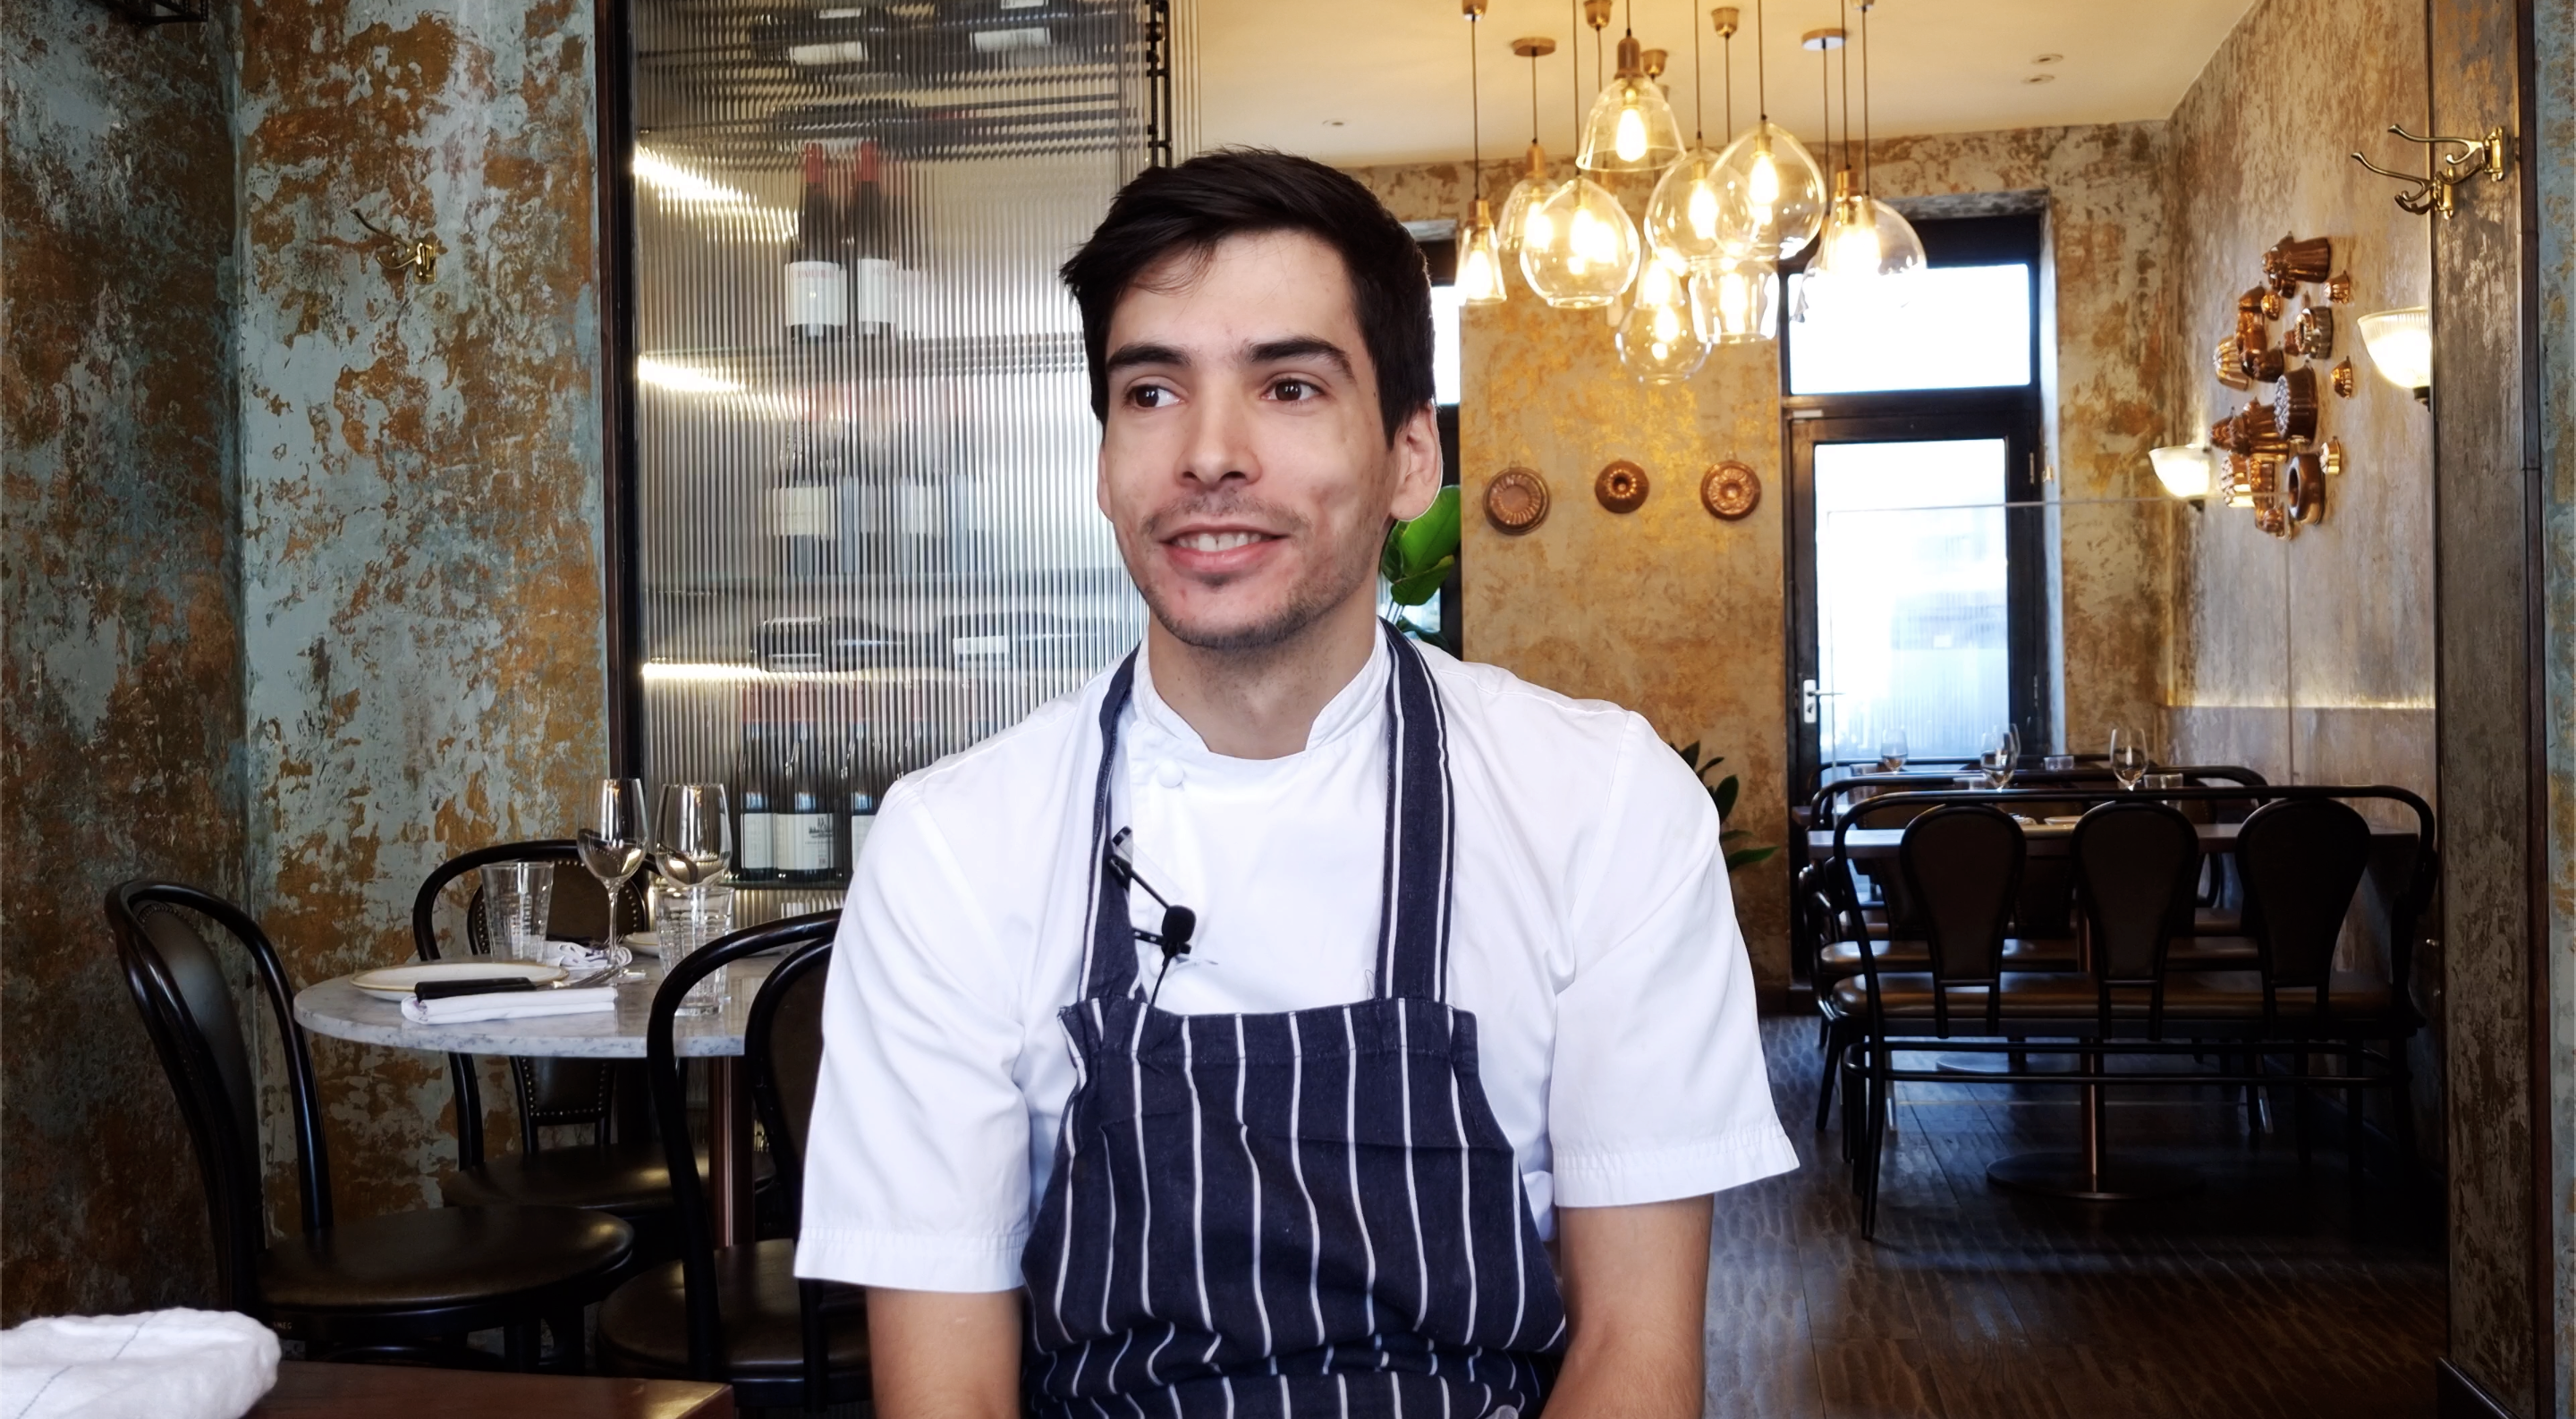 Nuno Resende, Head Chef at the Ninth